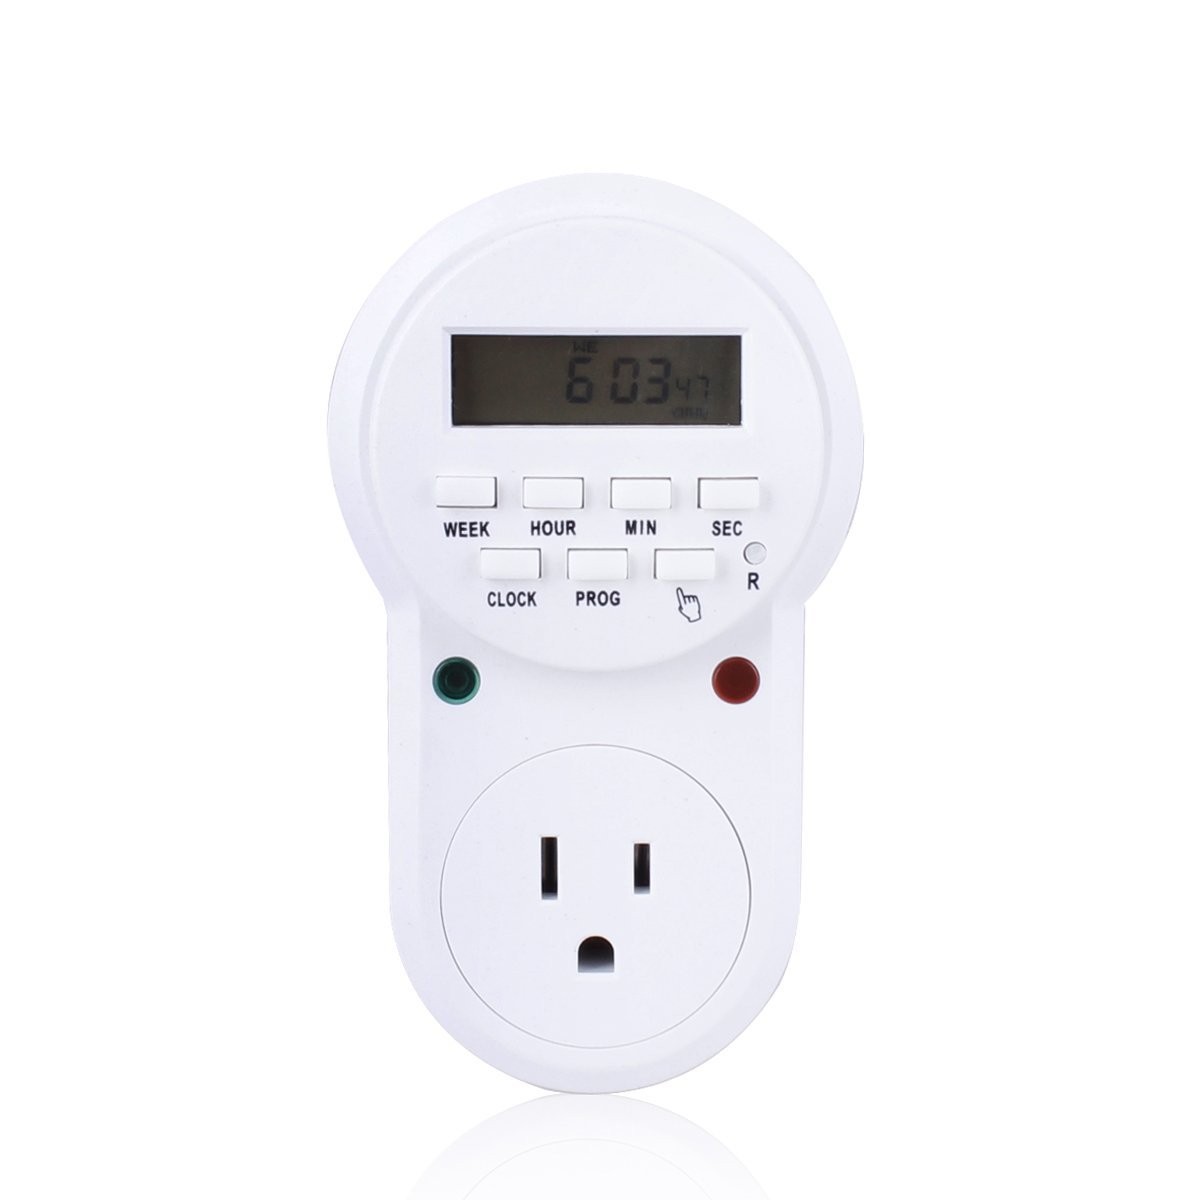 Digital Programmable Timer Socket Plug Wall Home Plug in switch Energy Saving Outlet DT 01 Amazon